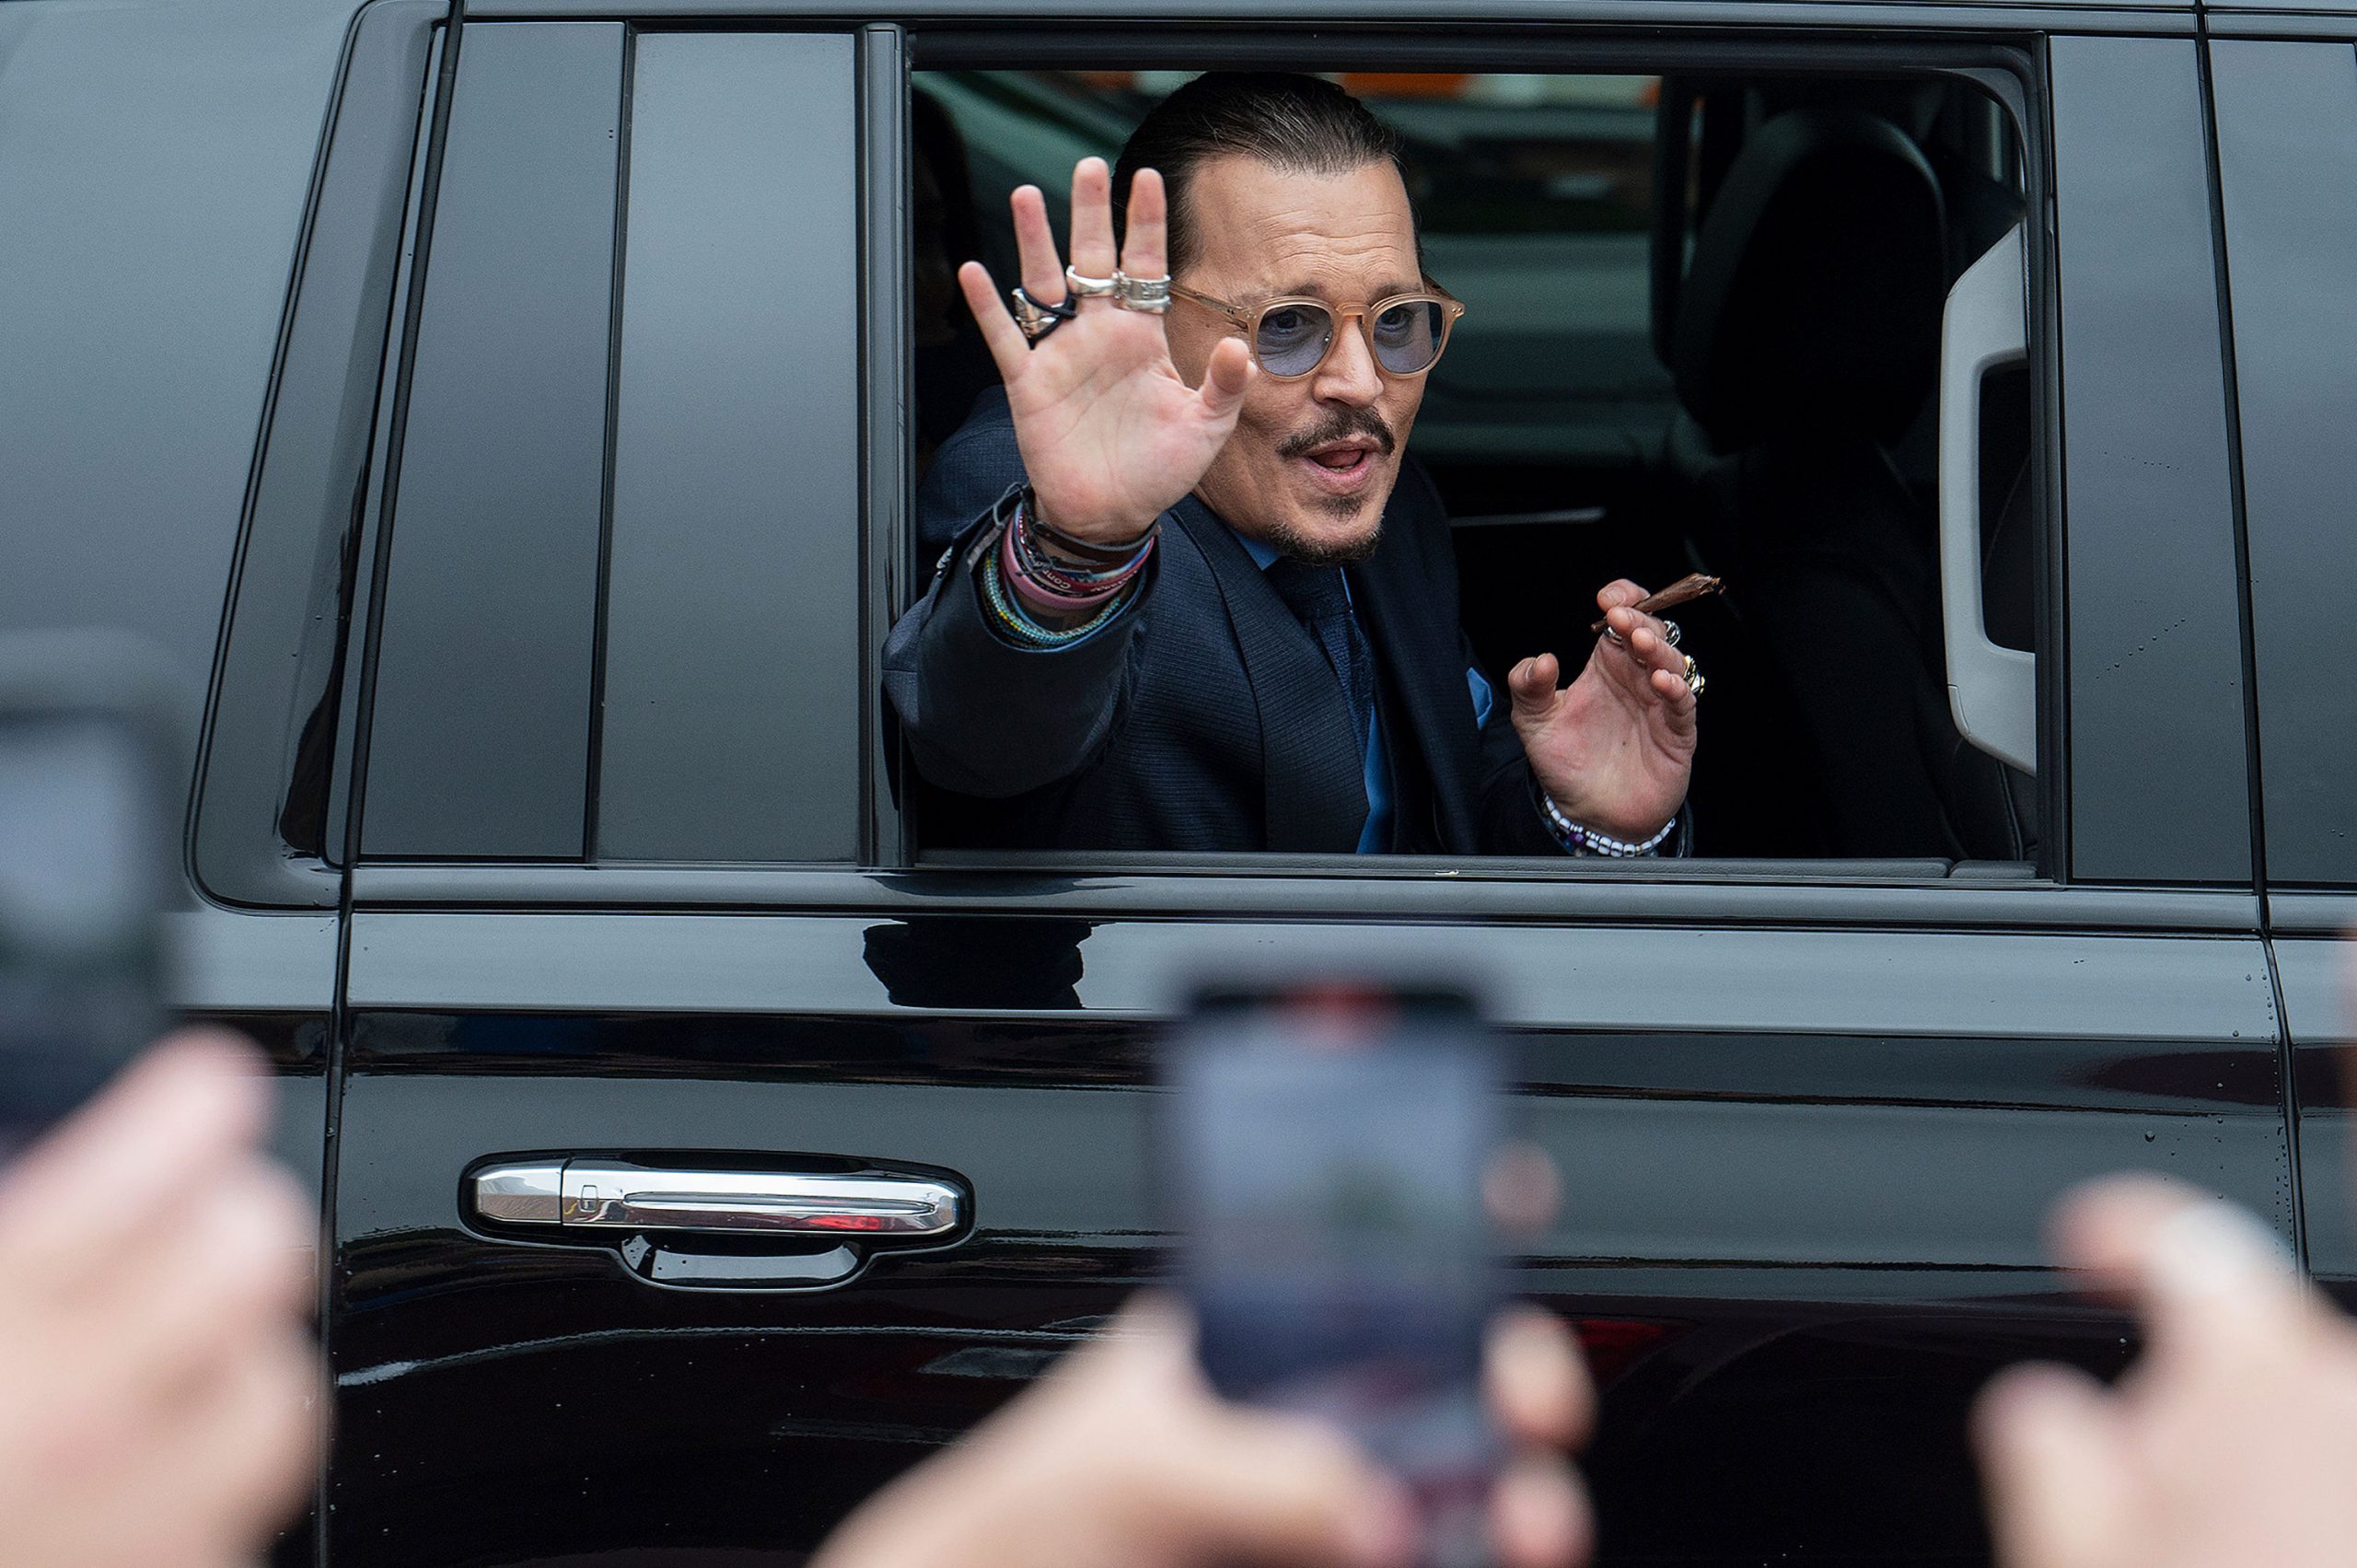 Court of public opinion won’t affect jury decision in Depp-Heard trial